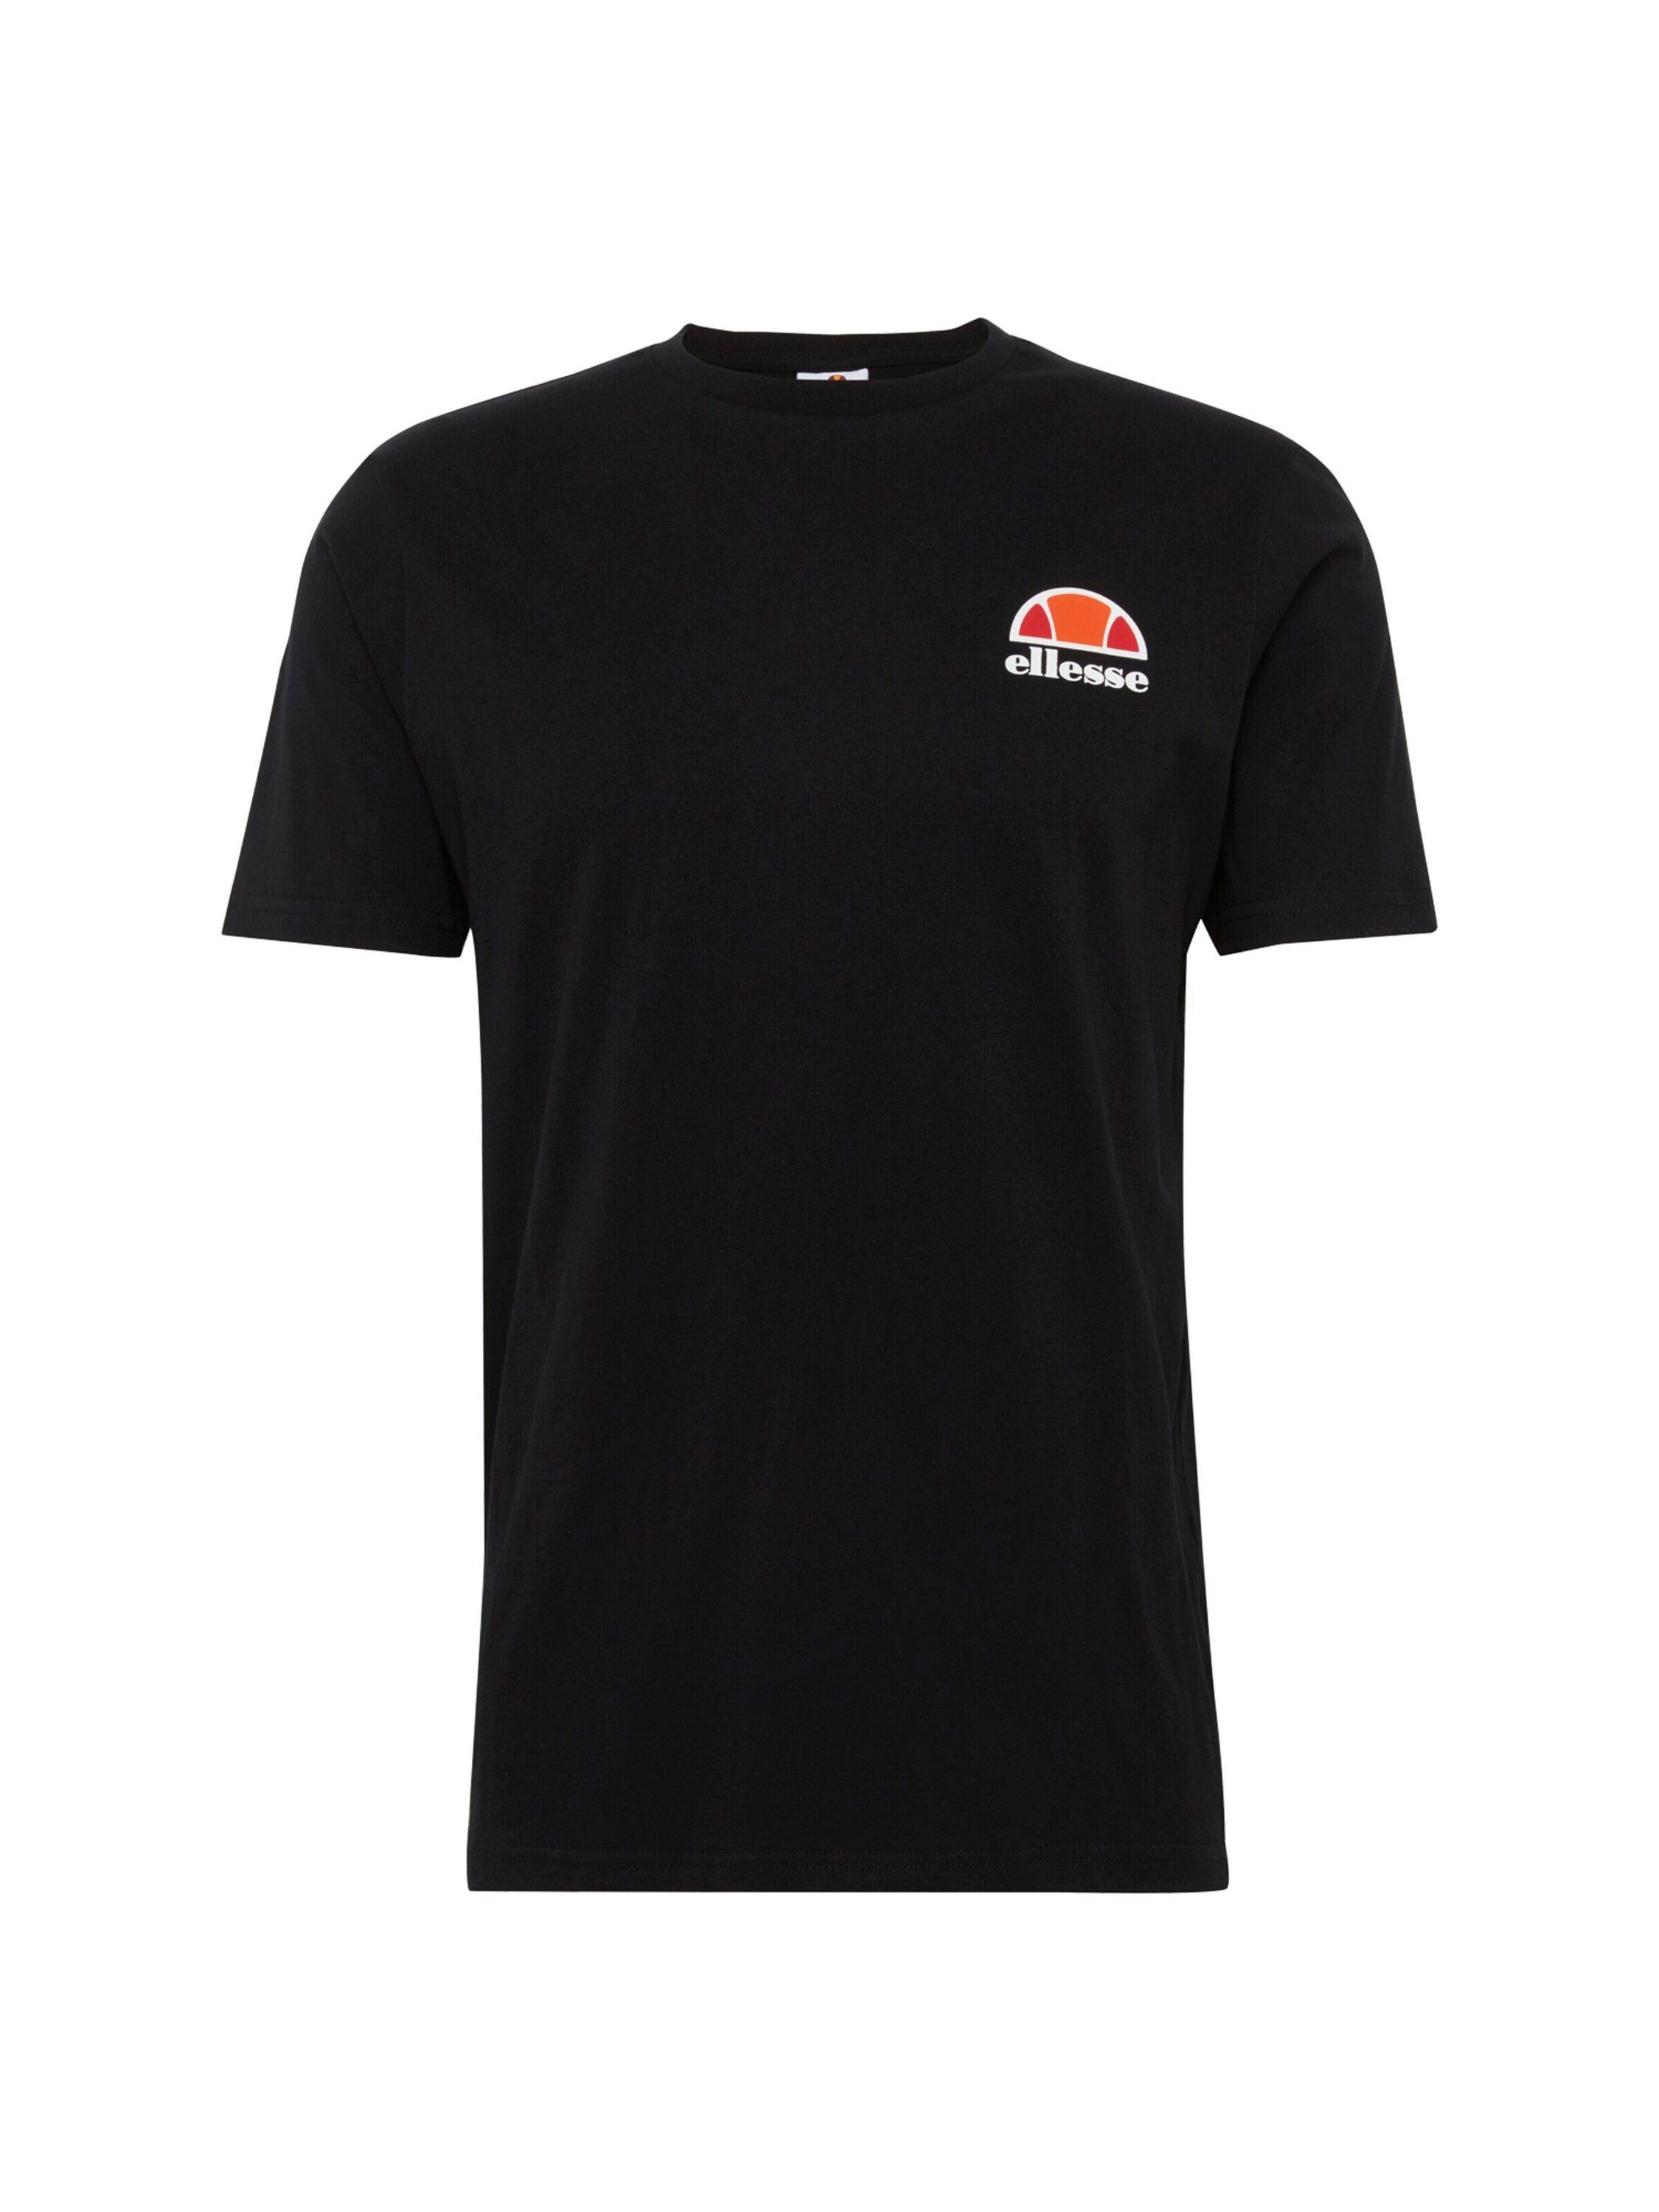 Canaletto T-Shirt anthracite Ellesse (1-tlg)